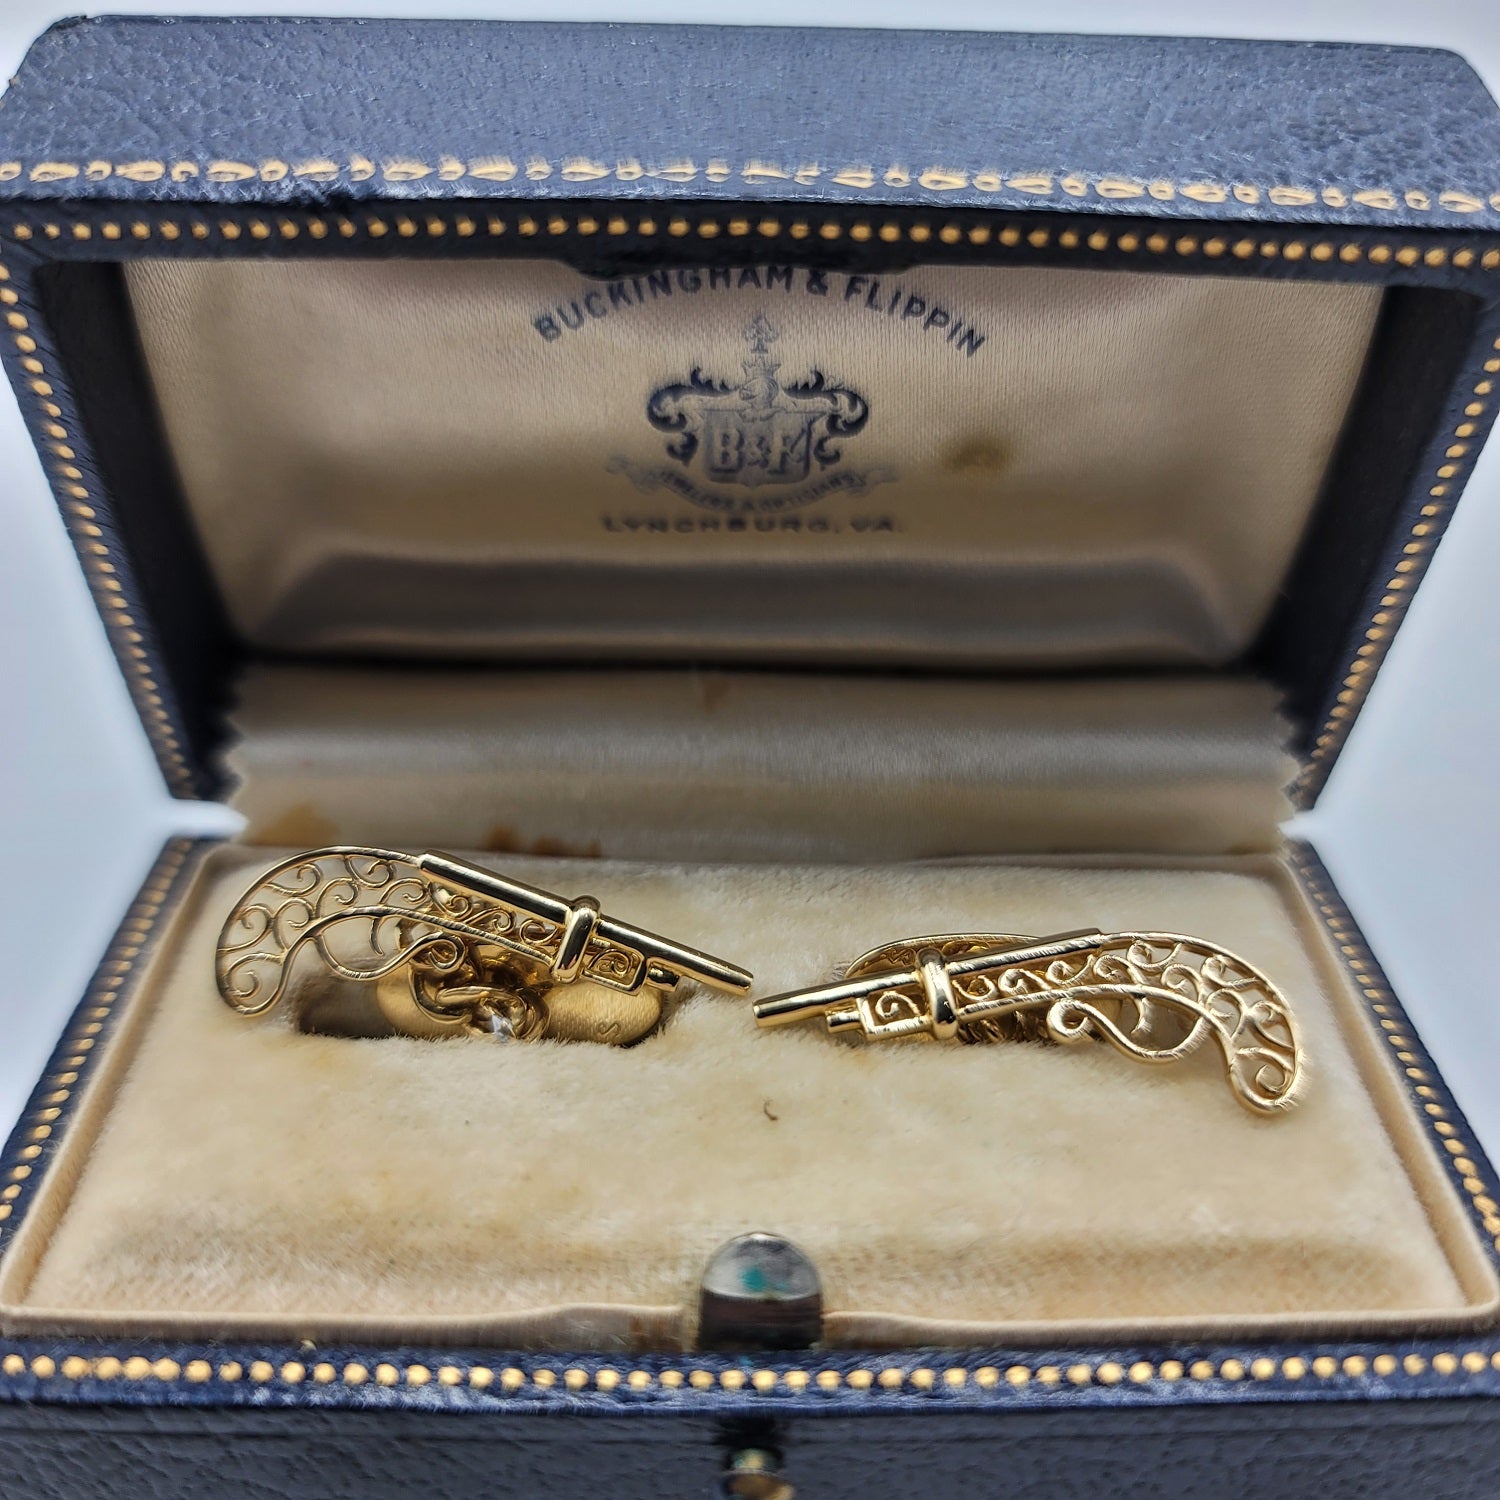 Super RARE and Awesome Pair of Vintage Filigree Cufflinks in 18K Gold | Peter's Vaults